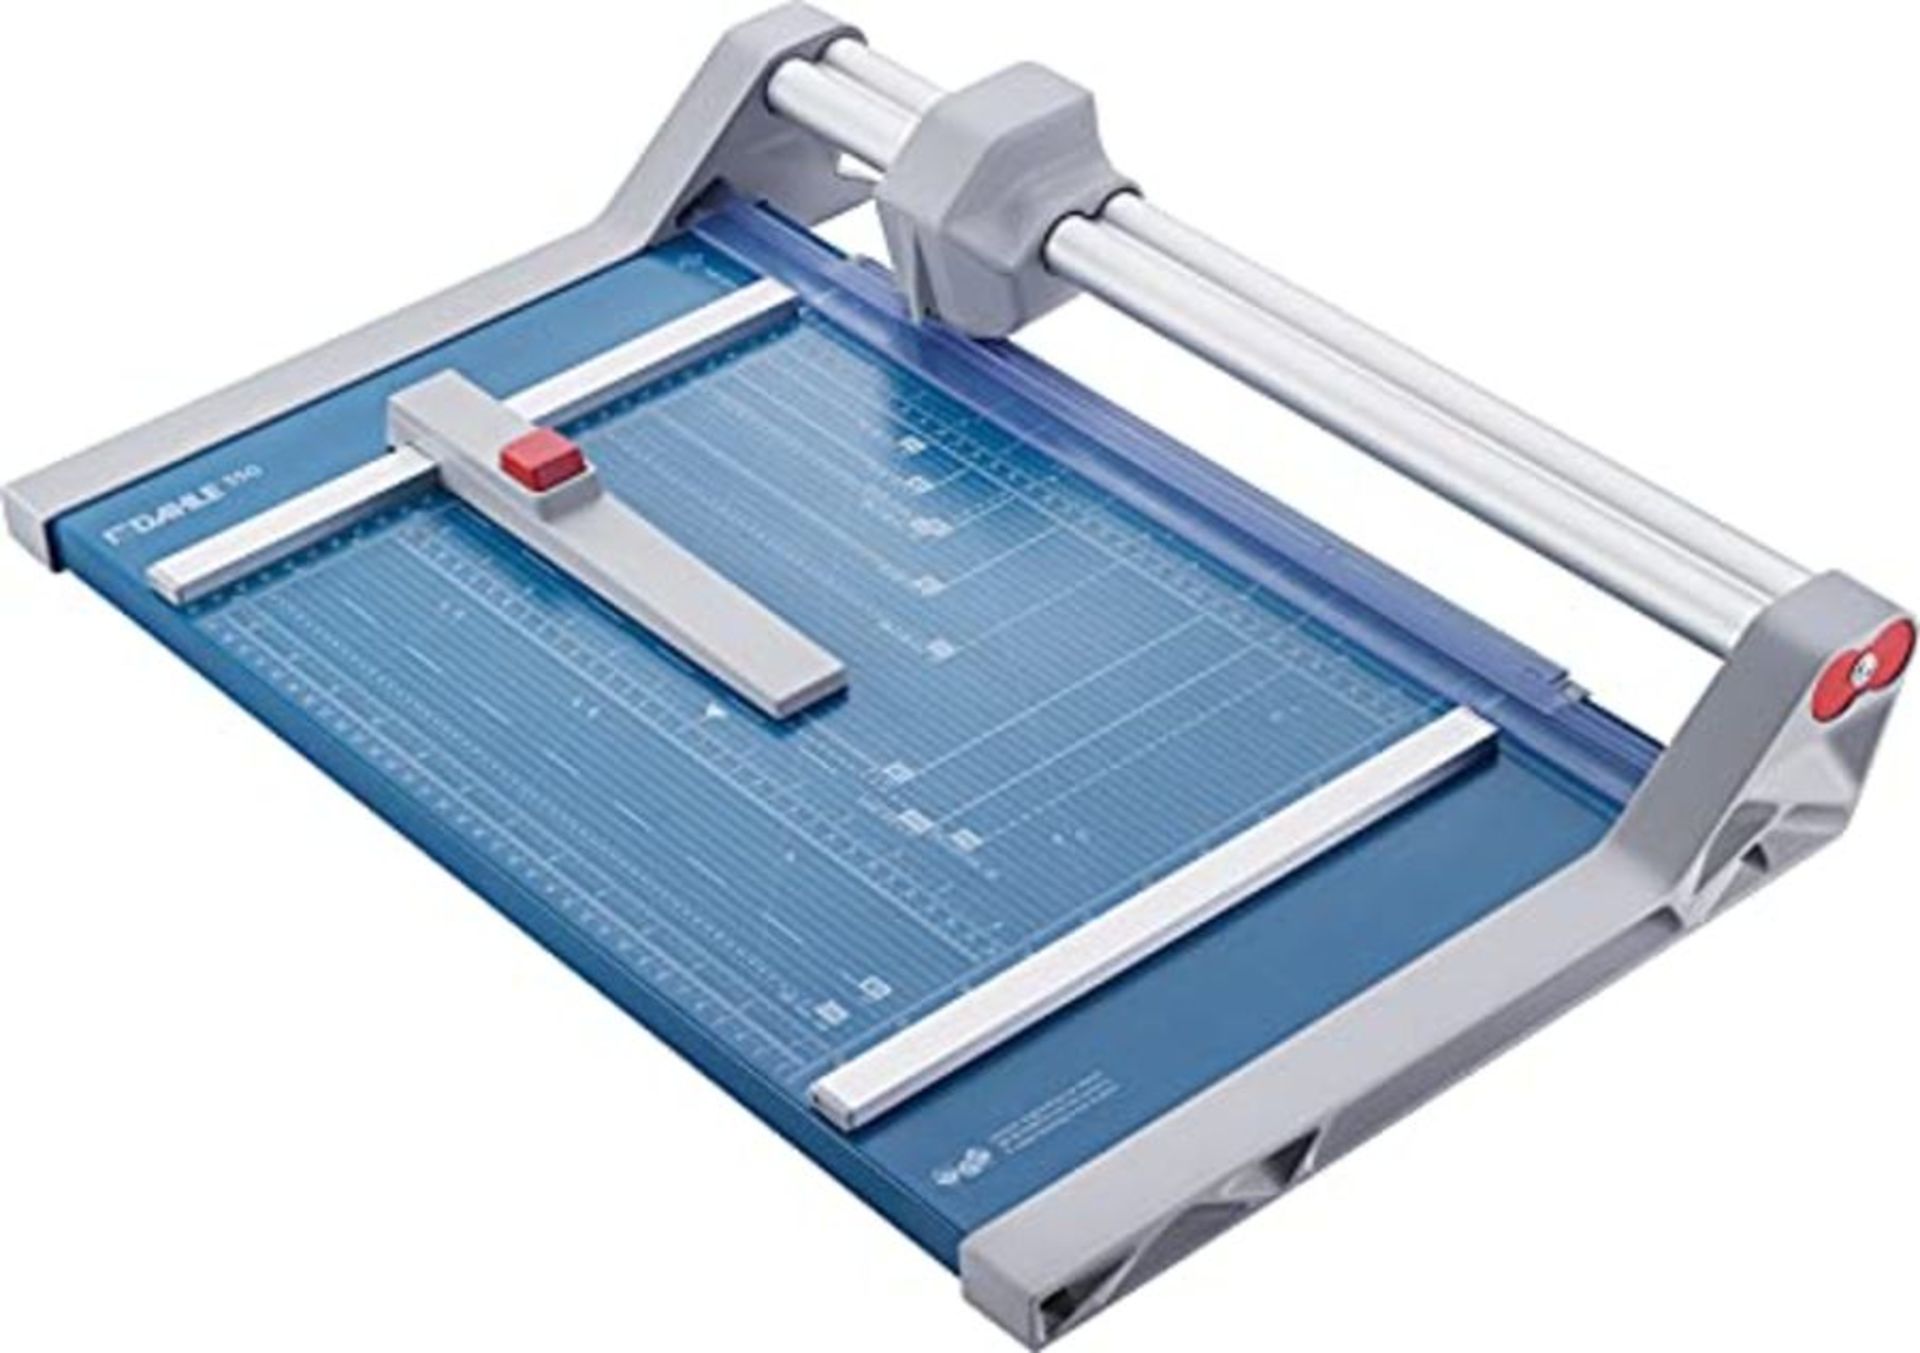 RRP £95.00 Dahle 550 Rotary Trimmer 2020 Model (Cutting Performance up to 20 Sheets / DIN A4) Blu